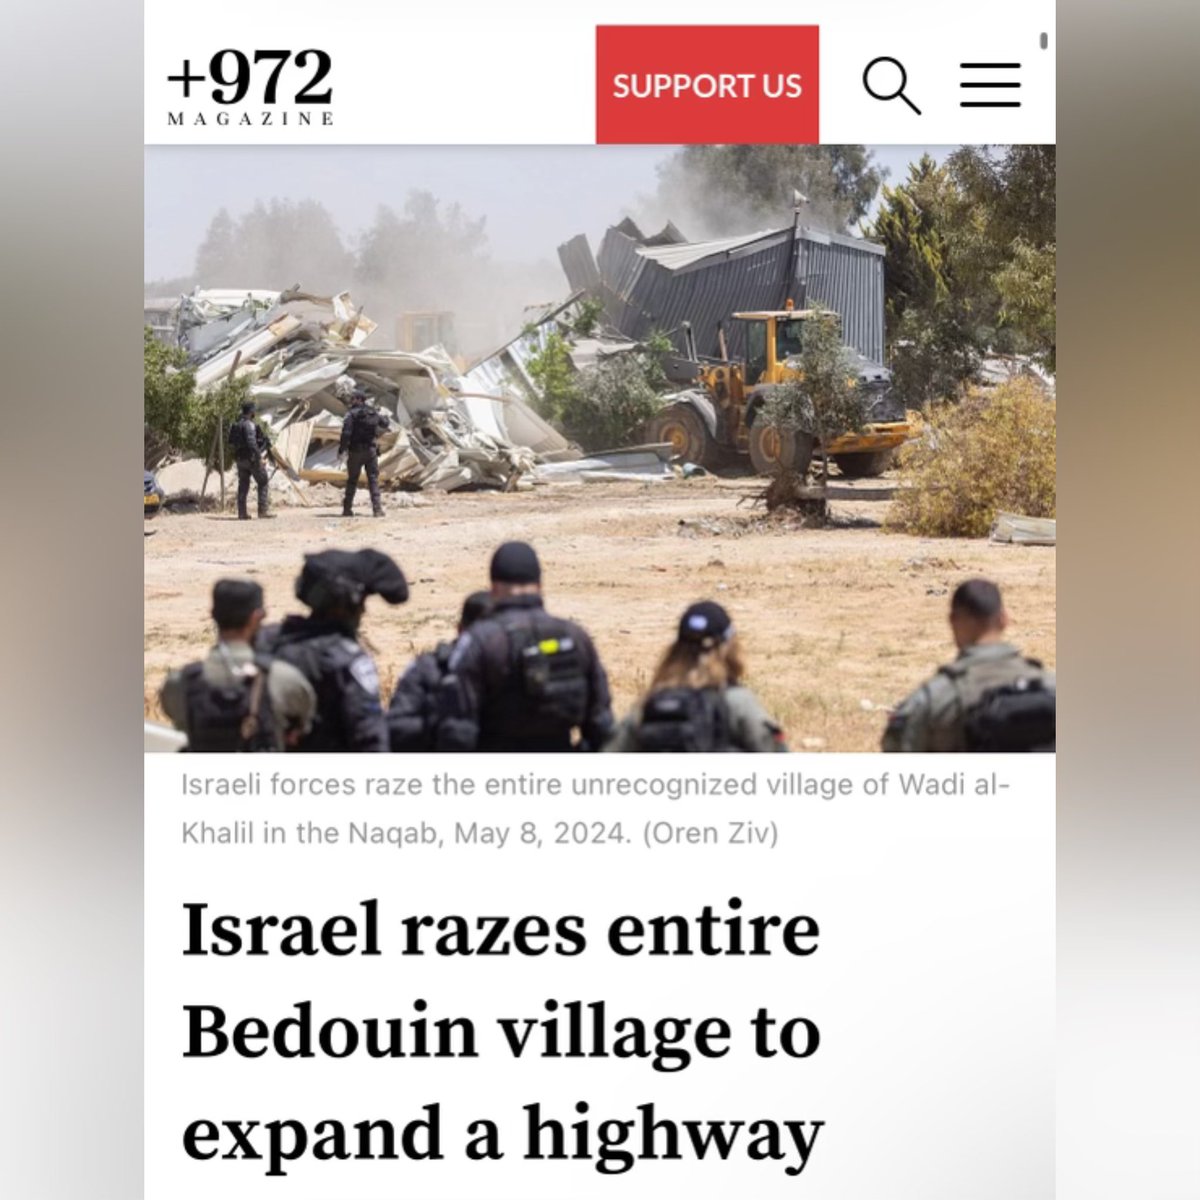 BREAKING: After killing 35,000 Palestinians in Gaza, Israel is planning to raze 35 Arab villages in its own territory as part of a plan to establish 'Israeli-Jewish' governance in the Negev desert. More evidence of ethnic cleansing. Article: 972mag.com/israel-razes-b…